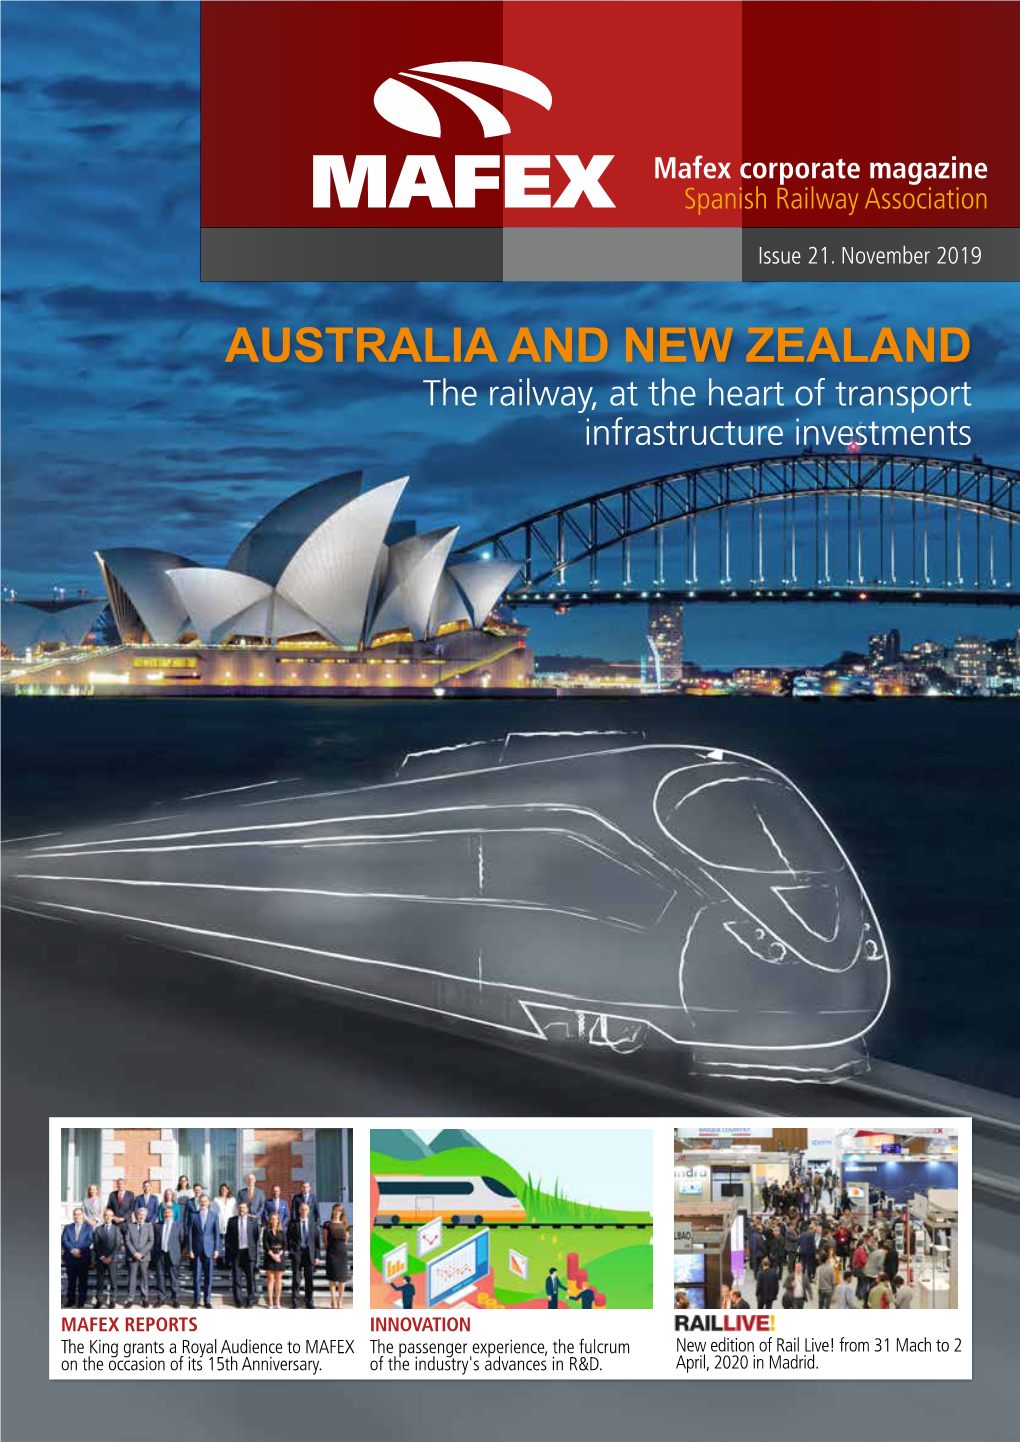 AUSTRALIA and NEW ZEALAND the Railway, at the Heart of Transport Infrastructure Investments